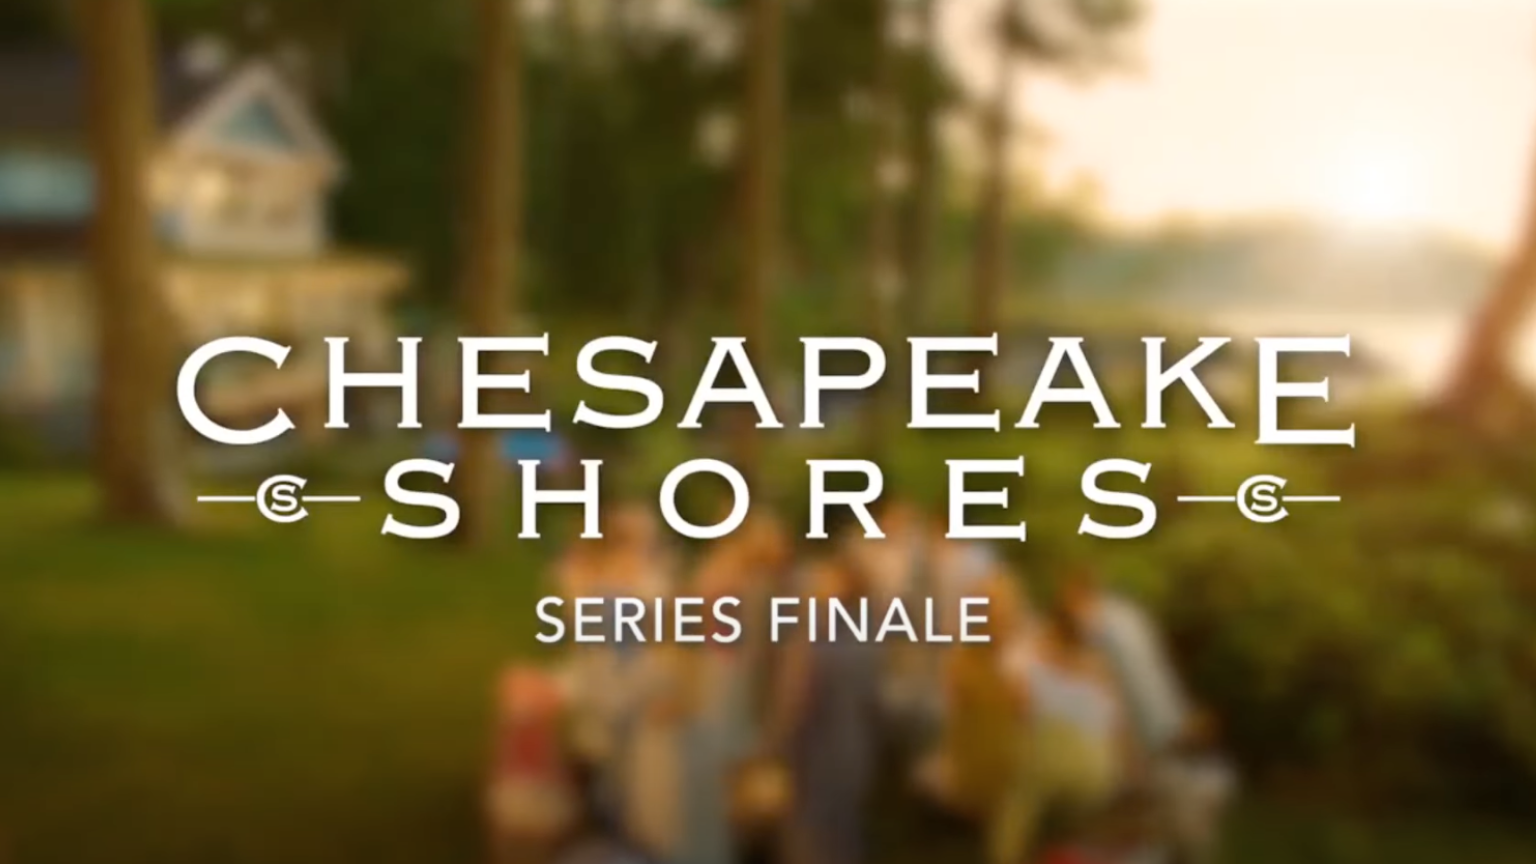 How to Watch 'Chesapeake Shores' Series Finale for Free on Roku, Apple TV, Fire TV, and Mobile